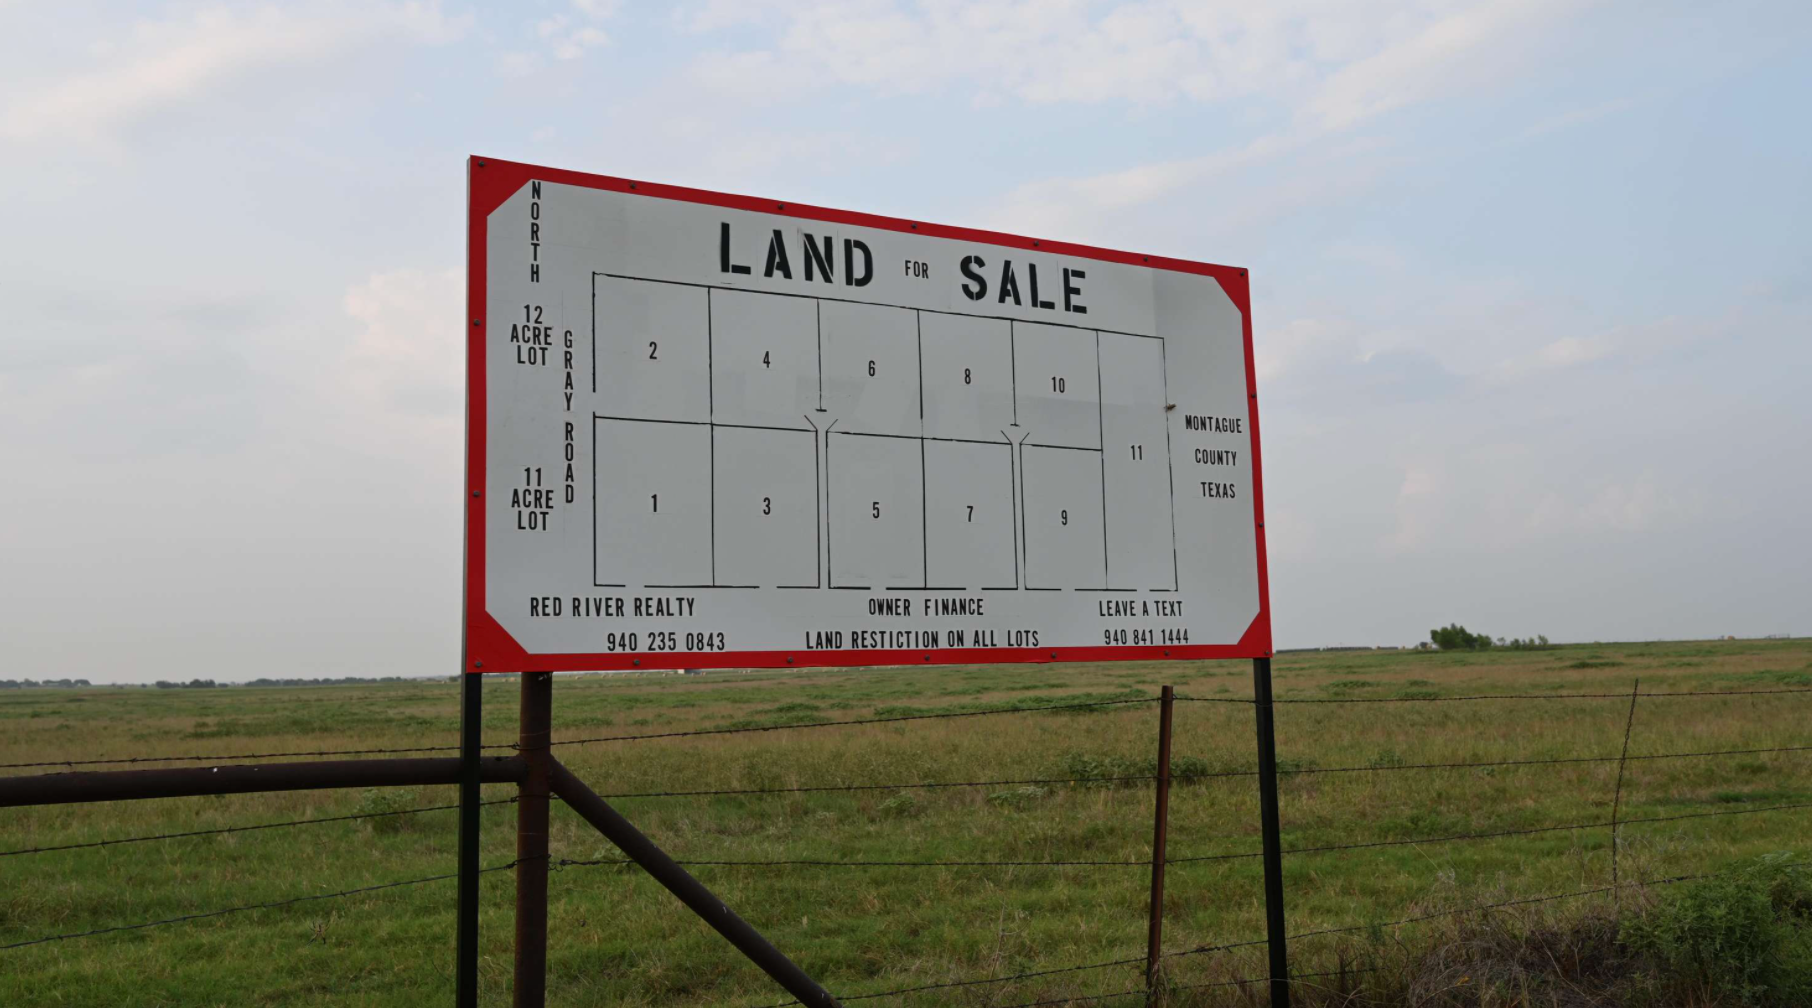 red-river-realty-gary-eldred-montague-county-nocona-texas-acres-development-new-home-builds-tract-landScreen Shot 2021-09-22 at 2.37.47 PM.png